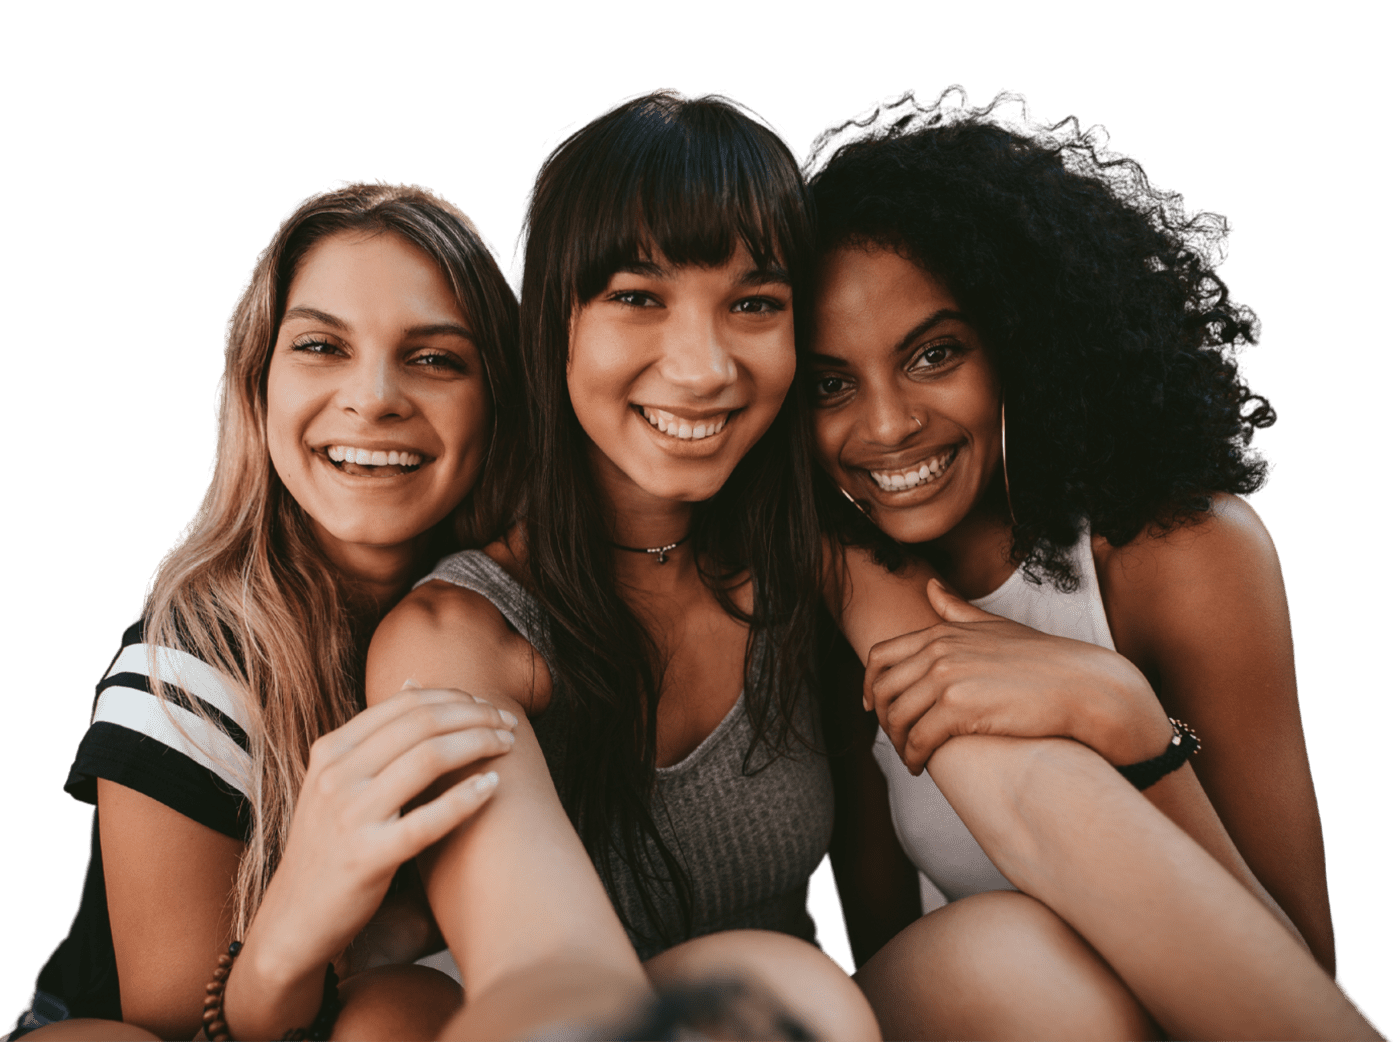 Three young adult women friends embracing each other